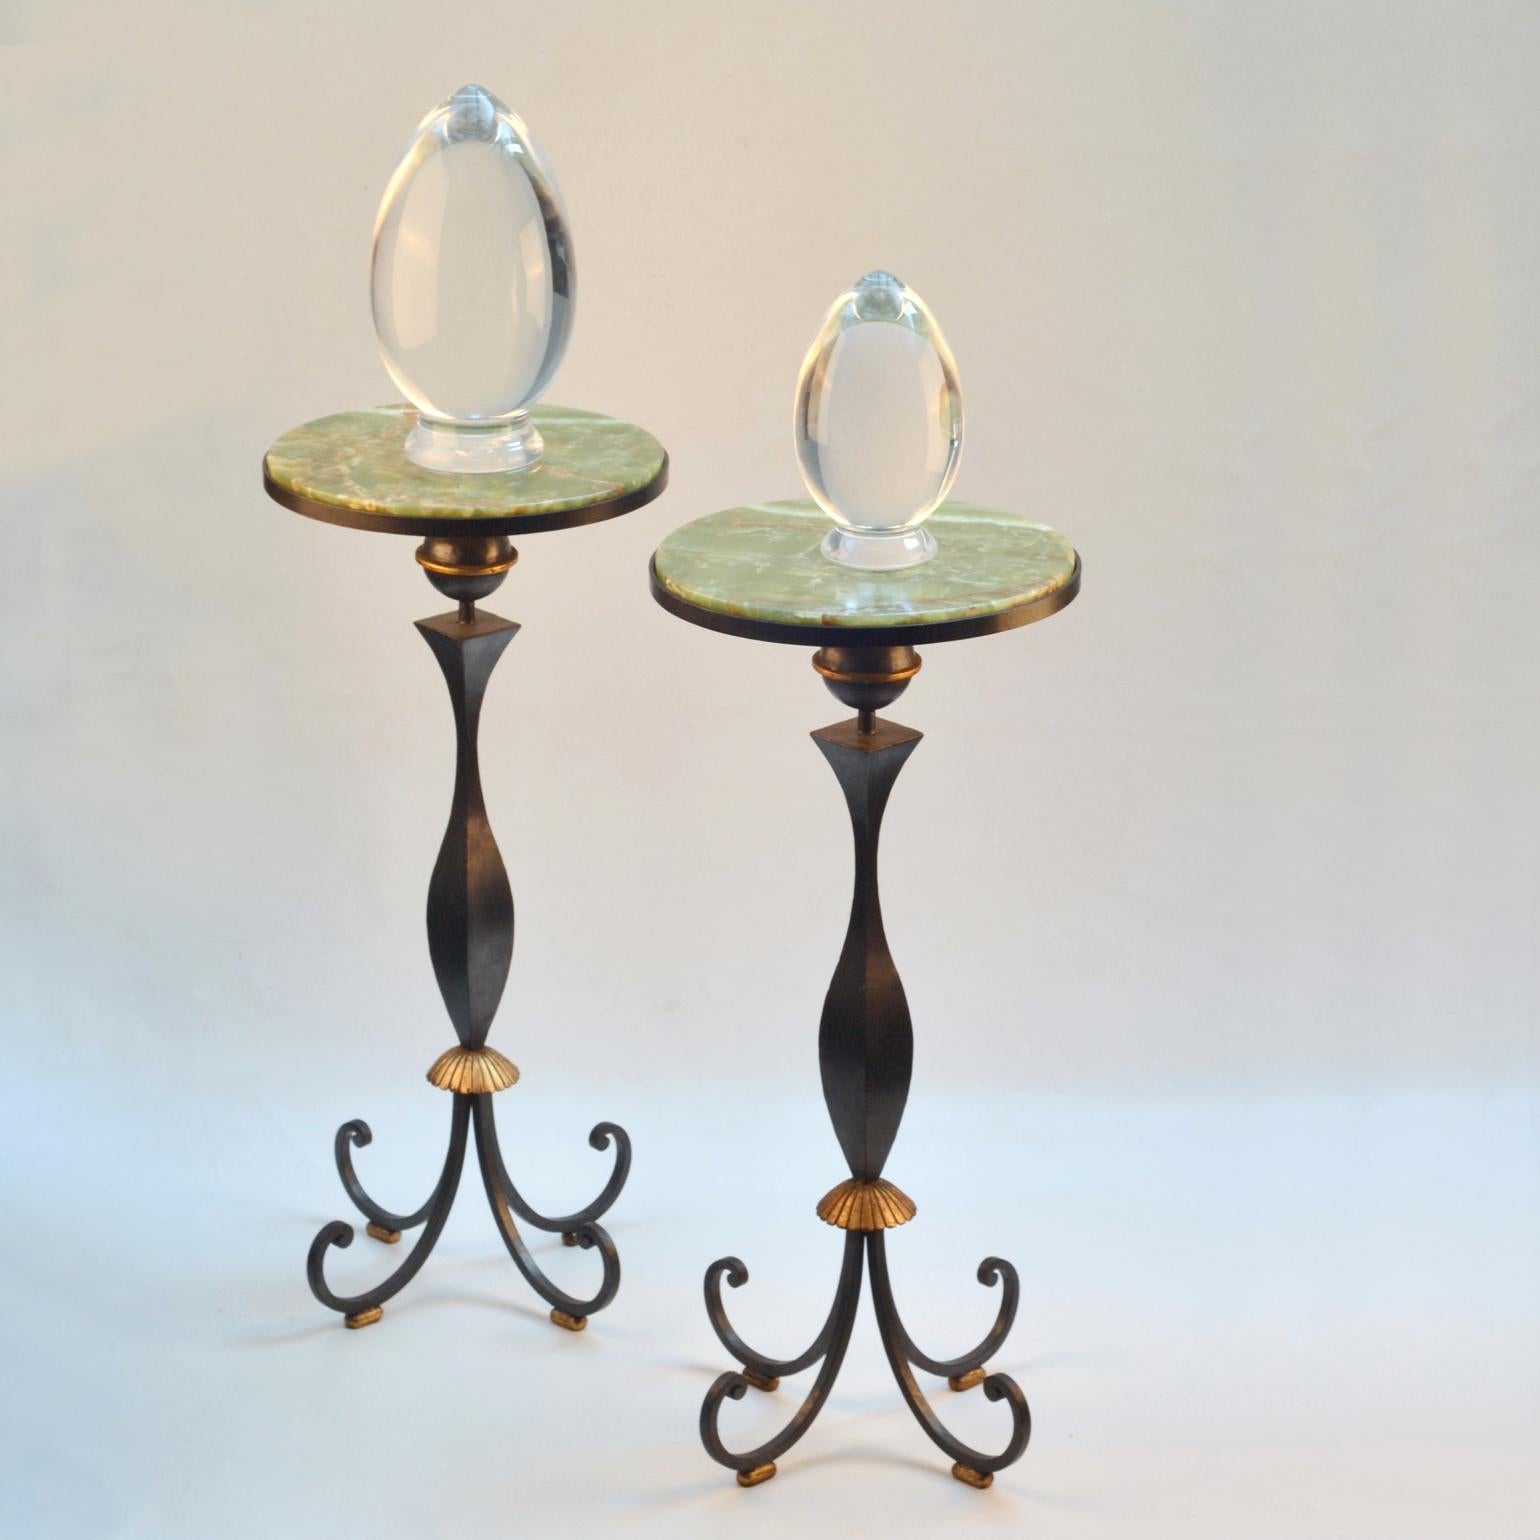 A pair of wrought black lacquered and gilt iron pedestal tables housing trays of green onyx plates. The central legs are swelled at the lower part support in the shape of a gold ringed ball on a four spiral scrolled legs. The legs rest on small